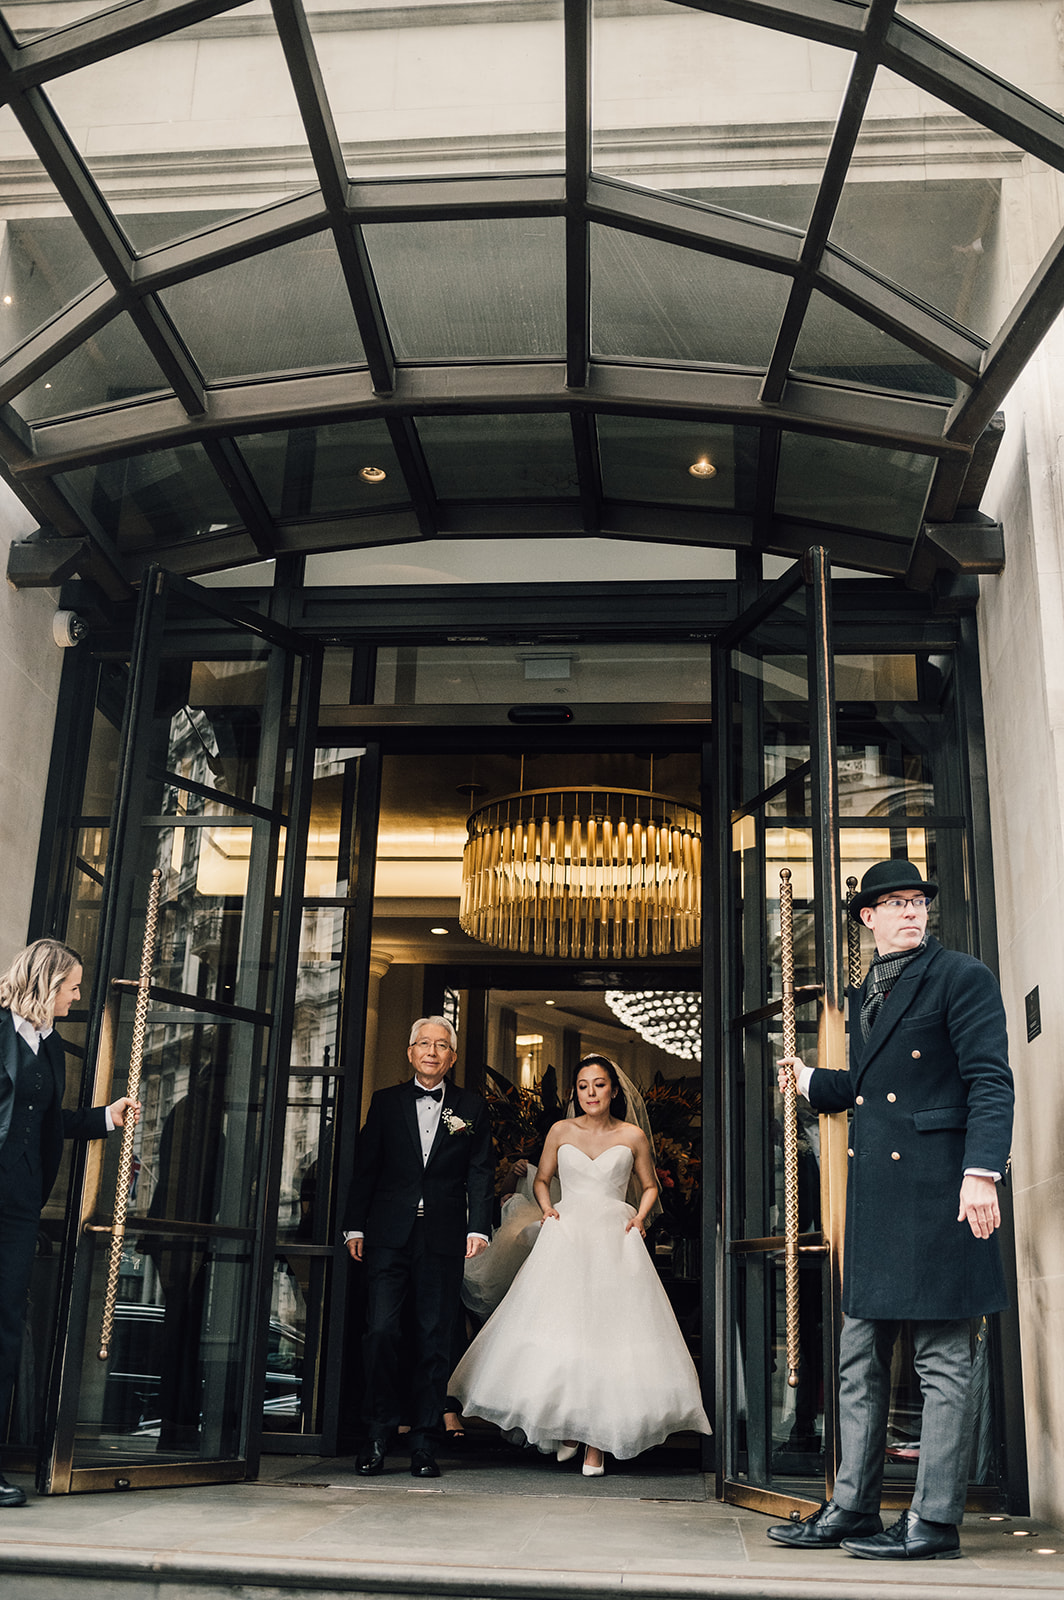 A bride and her father outside the Corinthia Hotel Luxury Wedding venue in London